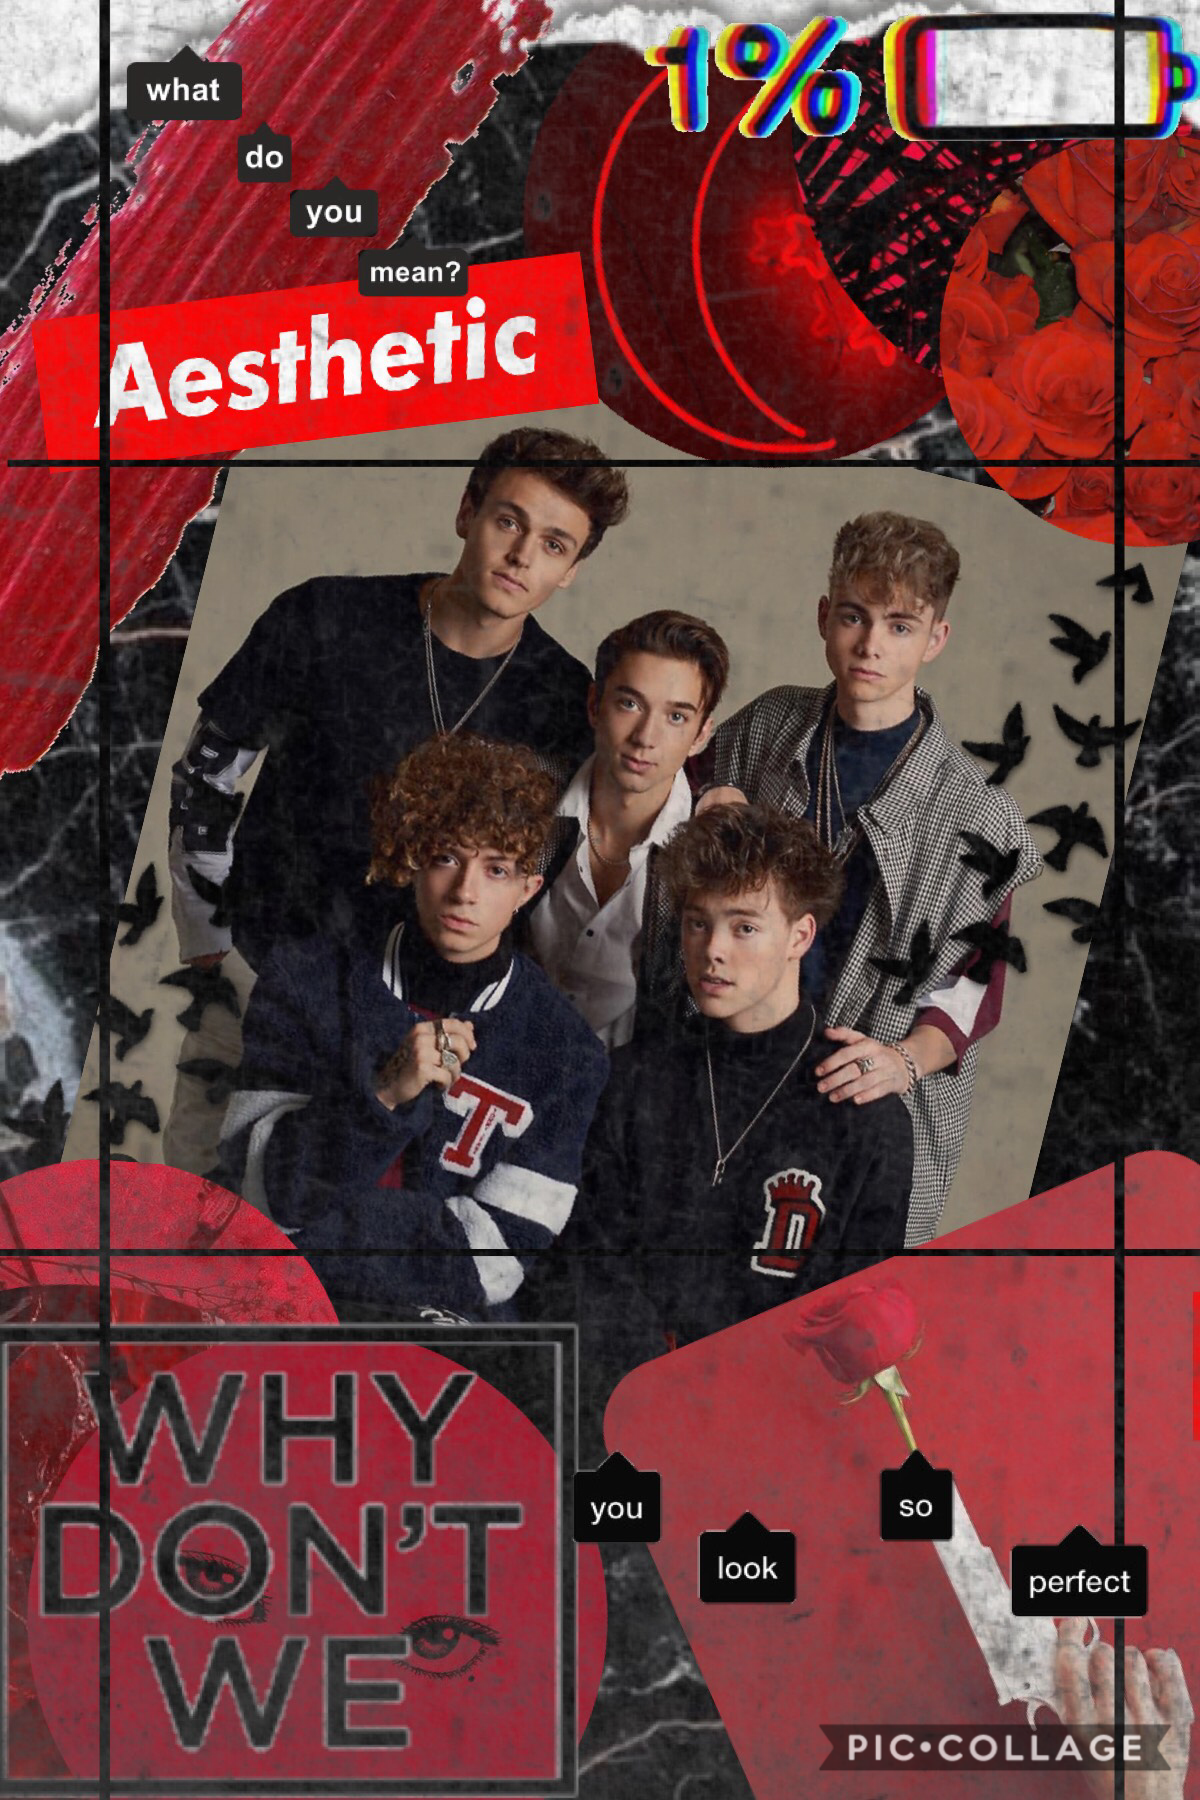 Why don’t we